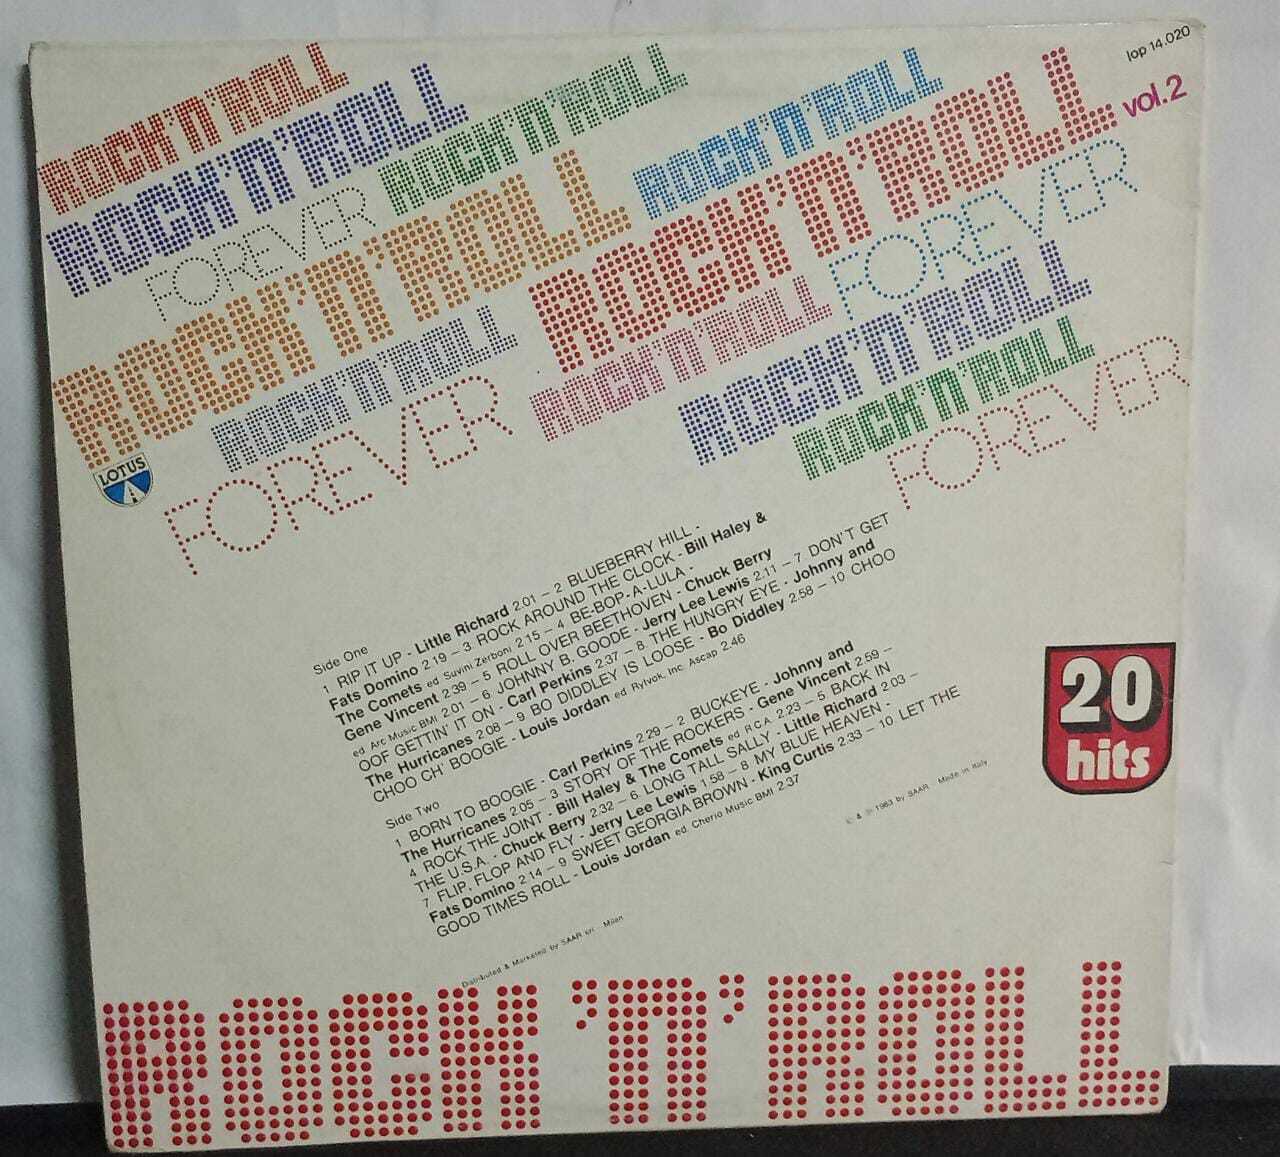 Vinil - Rock and Roll Forever - 20 Greatest Hits Vol 2 (Italy)